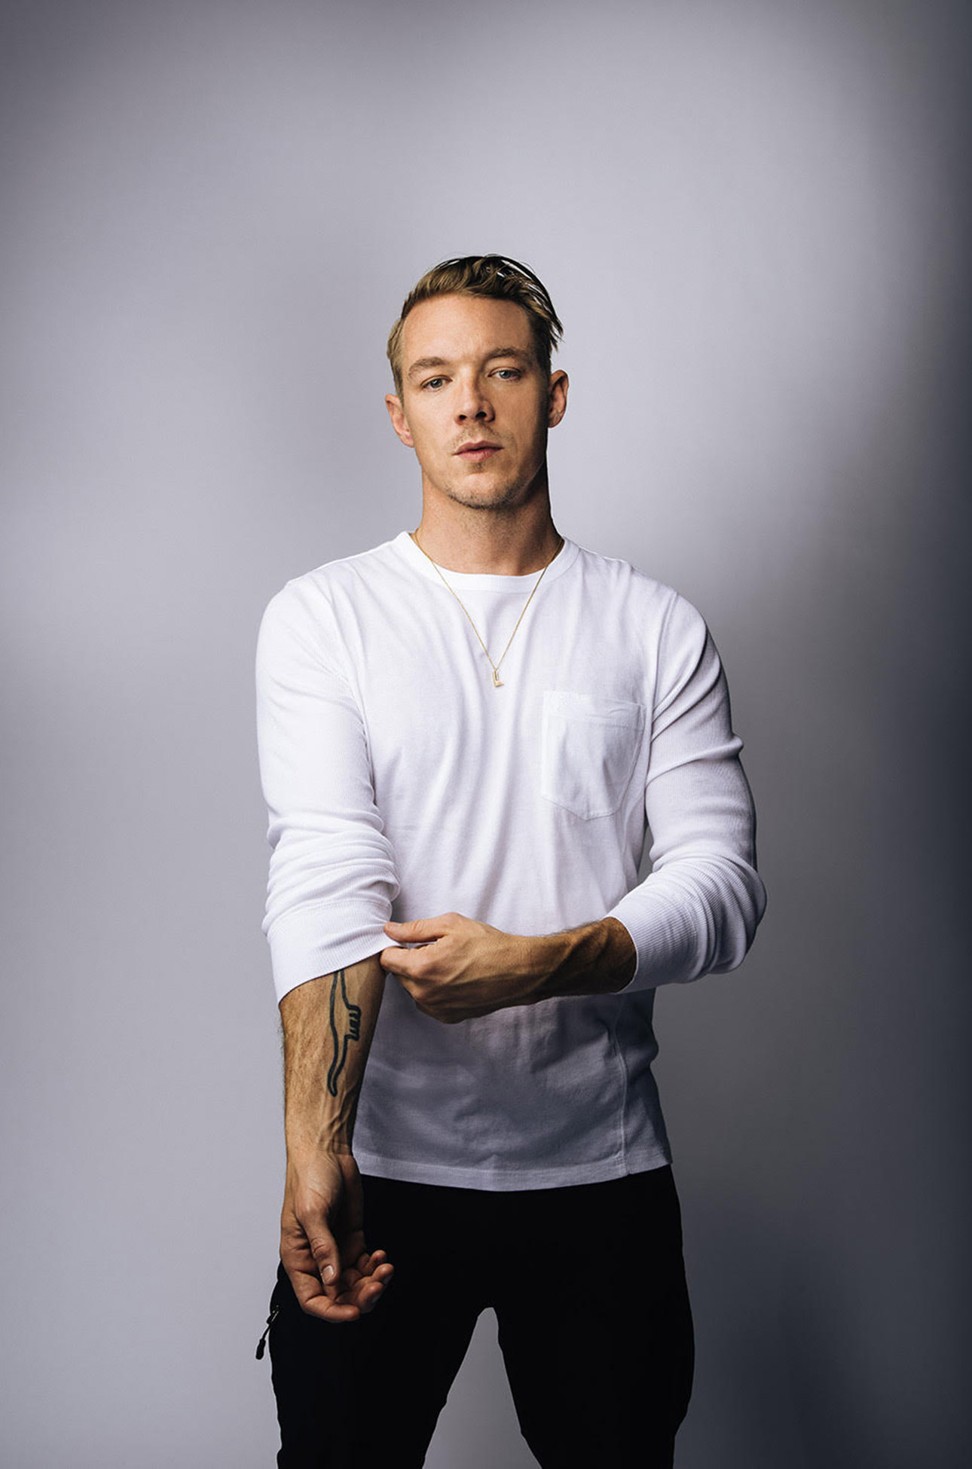 Diplo has been a big name in the music industry for the last decade.